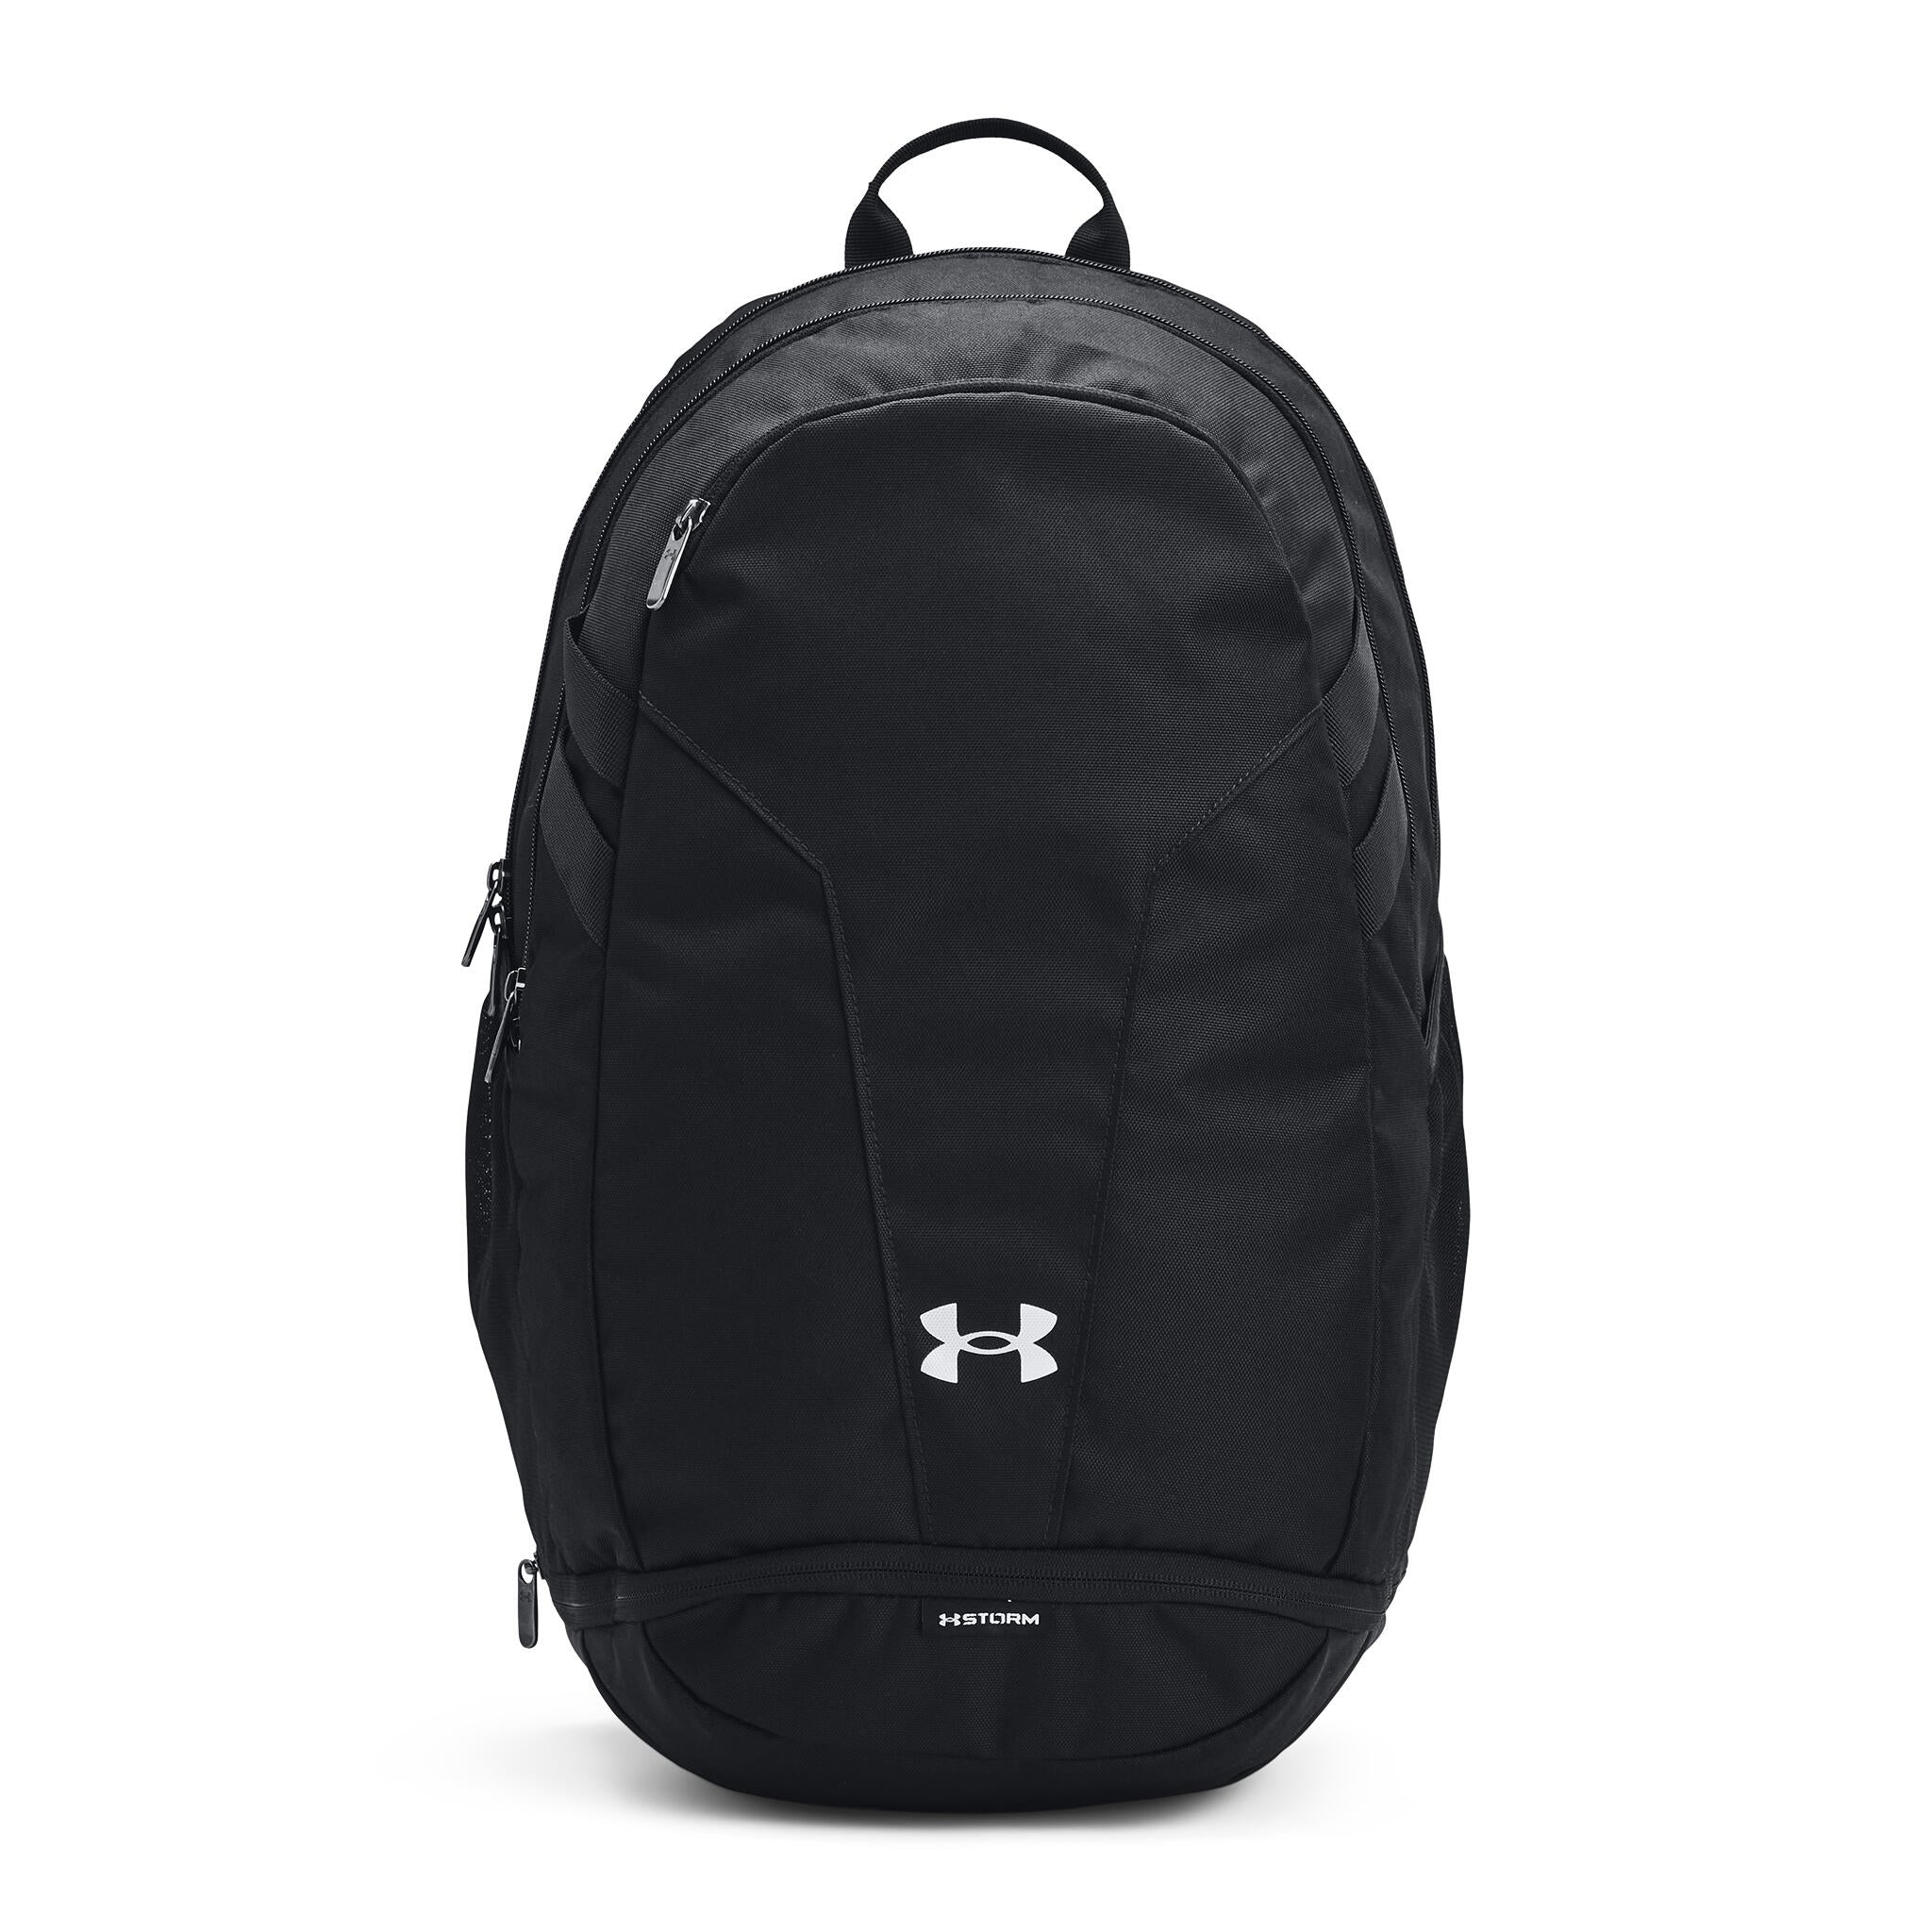 Under Armour Adult Ozsee Sackpack : : Sports & Outdoors